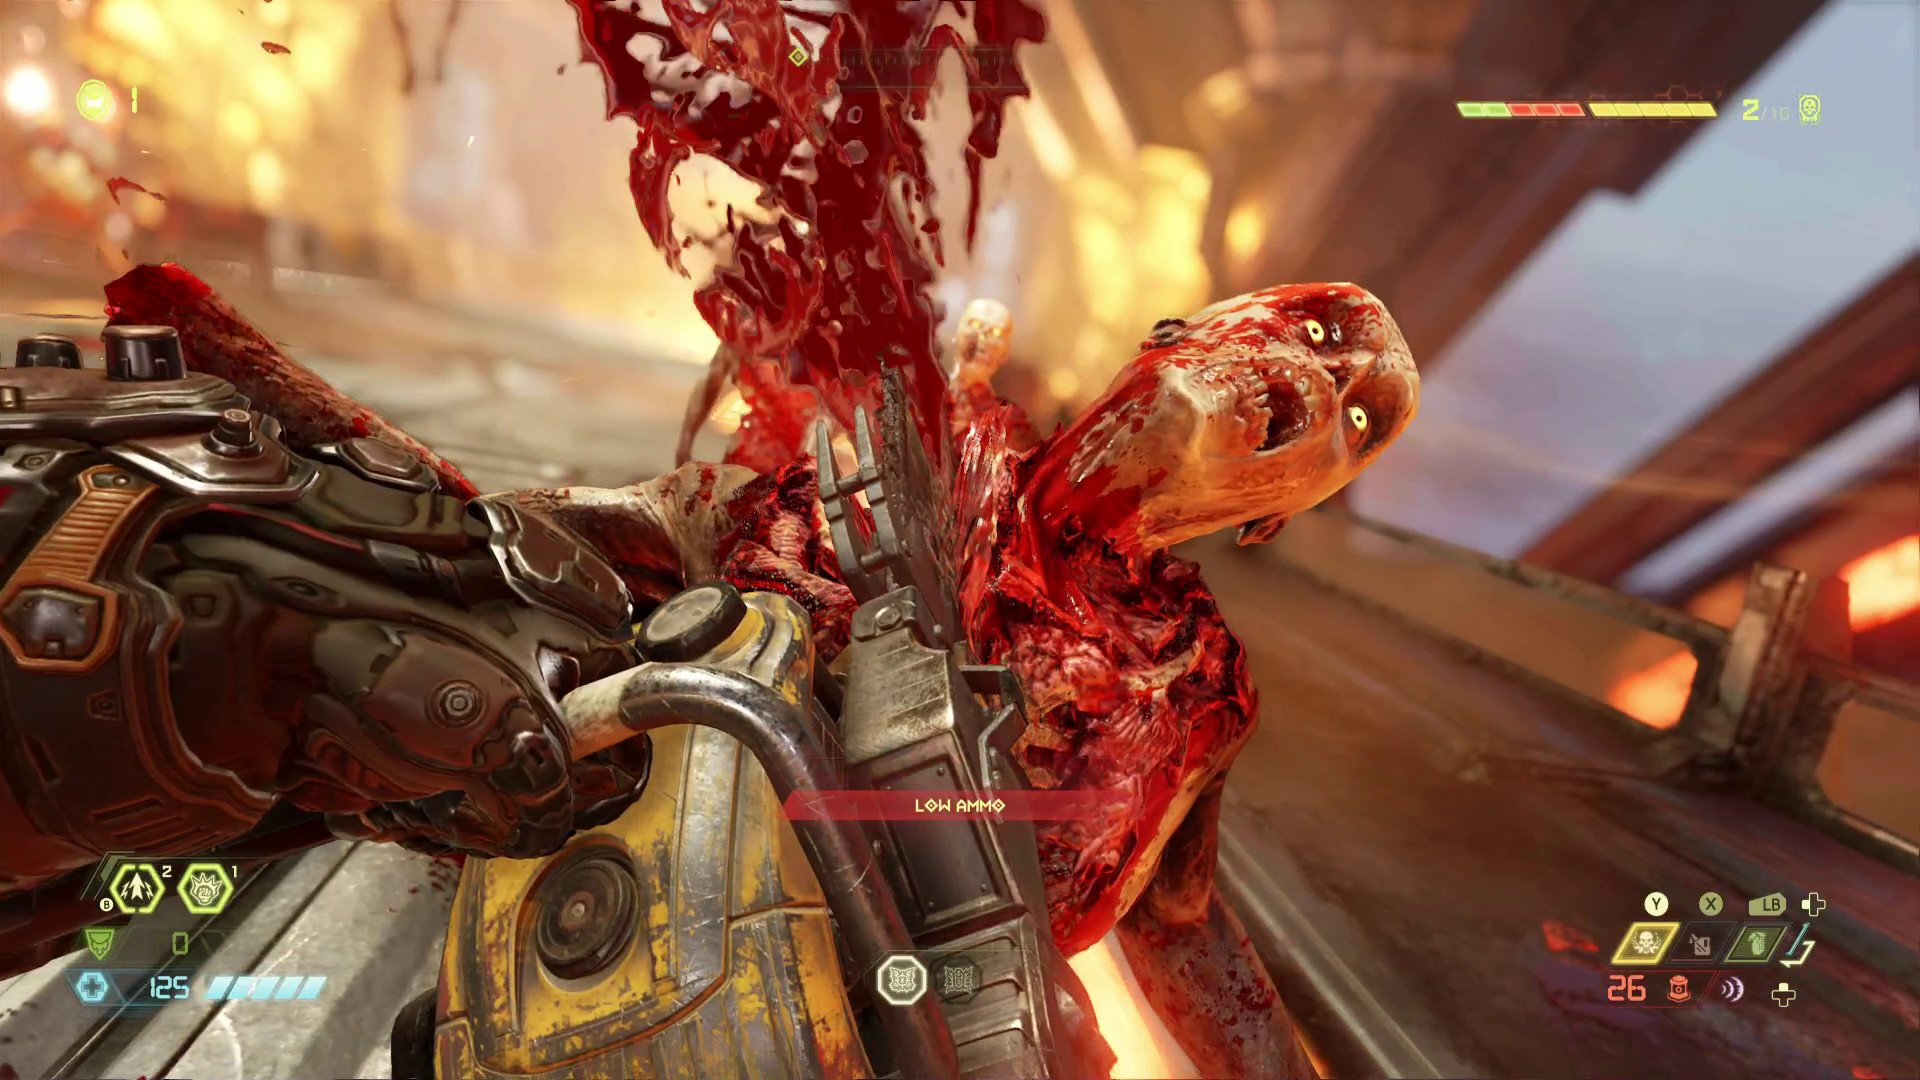 NVIDIA and AMD each have drivers ready for DOOM Eternal | Windows ...